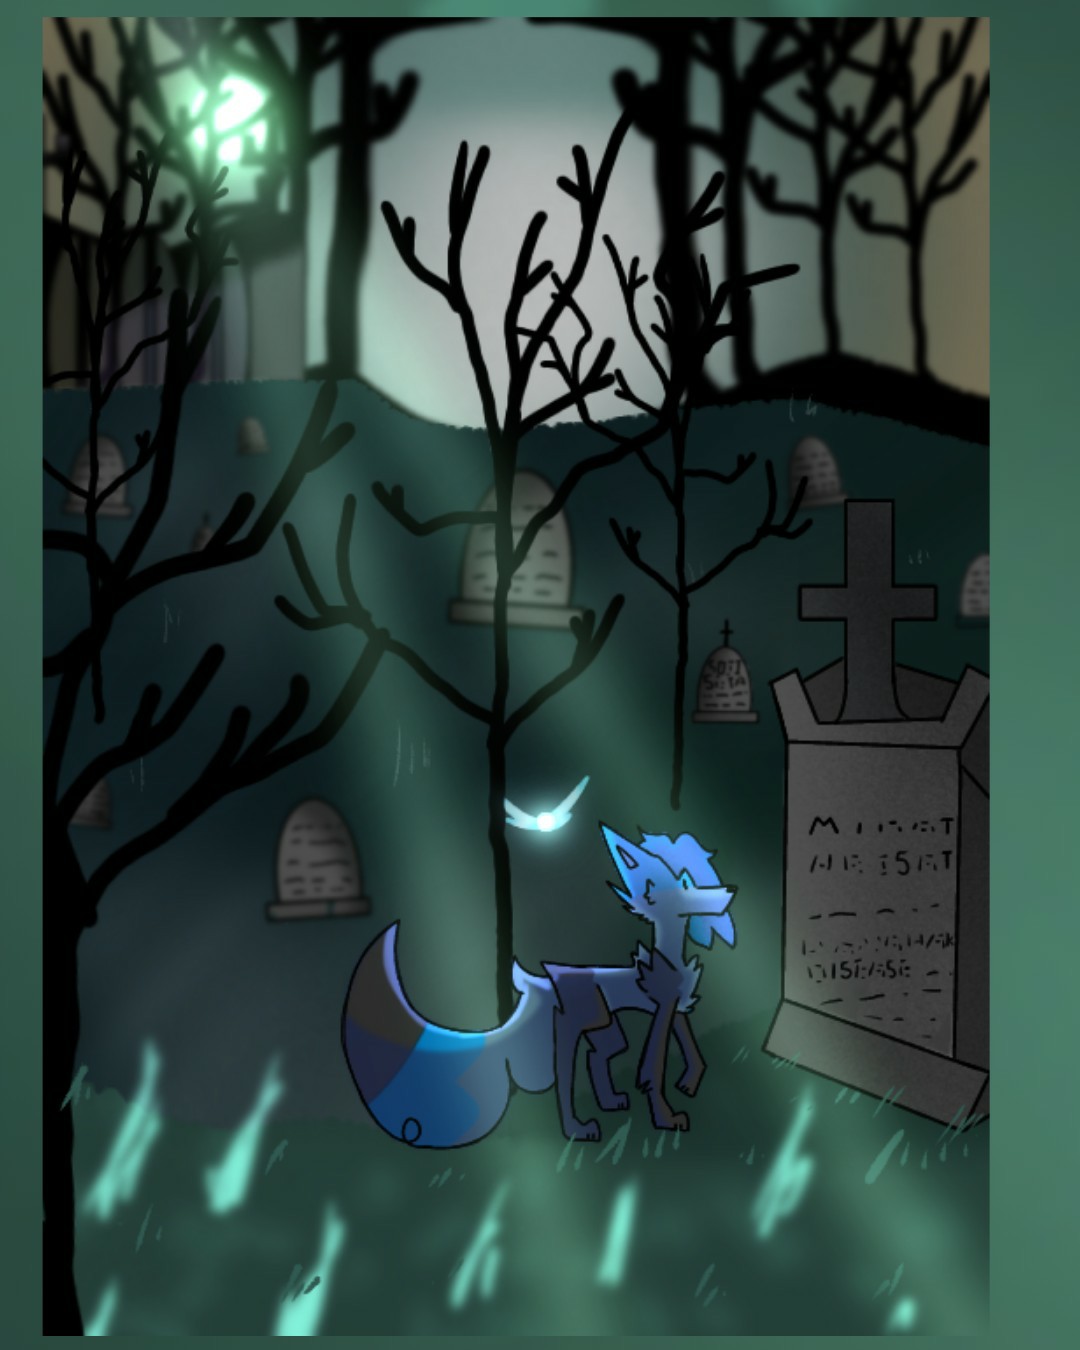 tAp
omg this is like the first time I've drawn something with a story behind it?
ANYWAY
HOW THE HECC DO YOU DRAW BACKGROUNDS DONT SAY THIS OS GOOD BC IT ISNT. OTS SO HARD TO TELL WHATS WHAT HSISHIHIWDIHWFIH